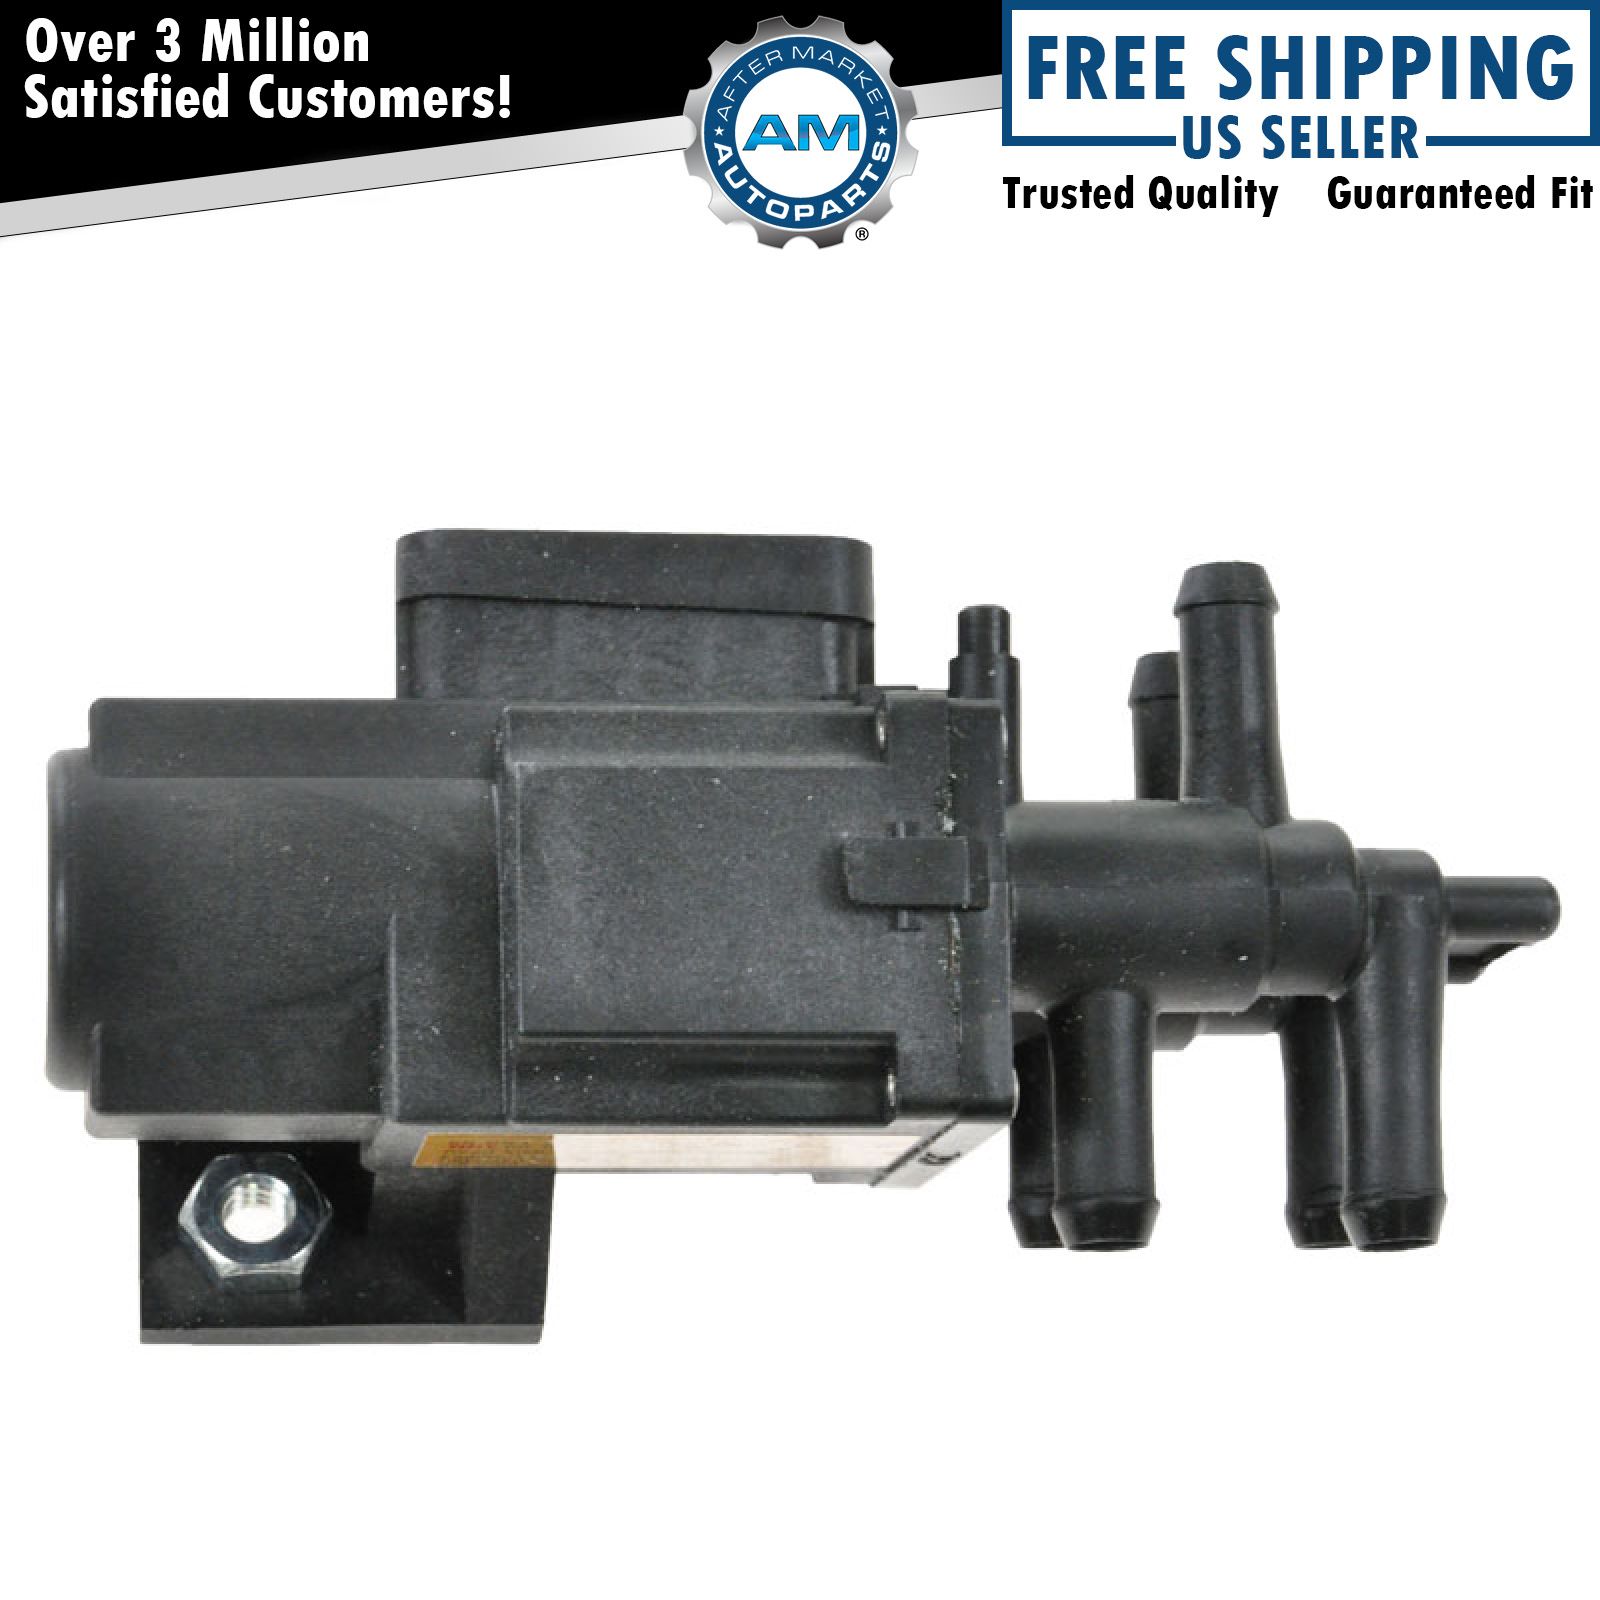 AC DELCO U7001 6 Port Fuel Gas Tank Selector Valve for Chevy Dodge Ford GMC